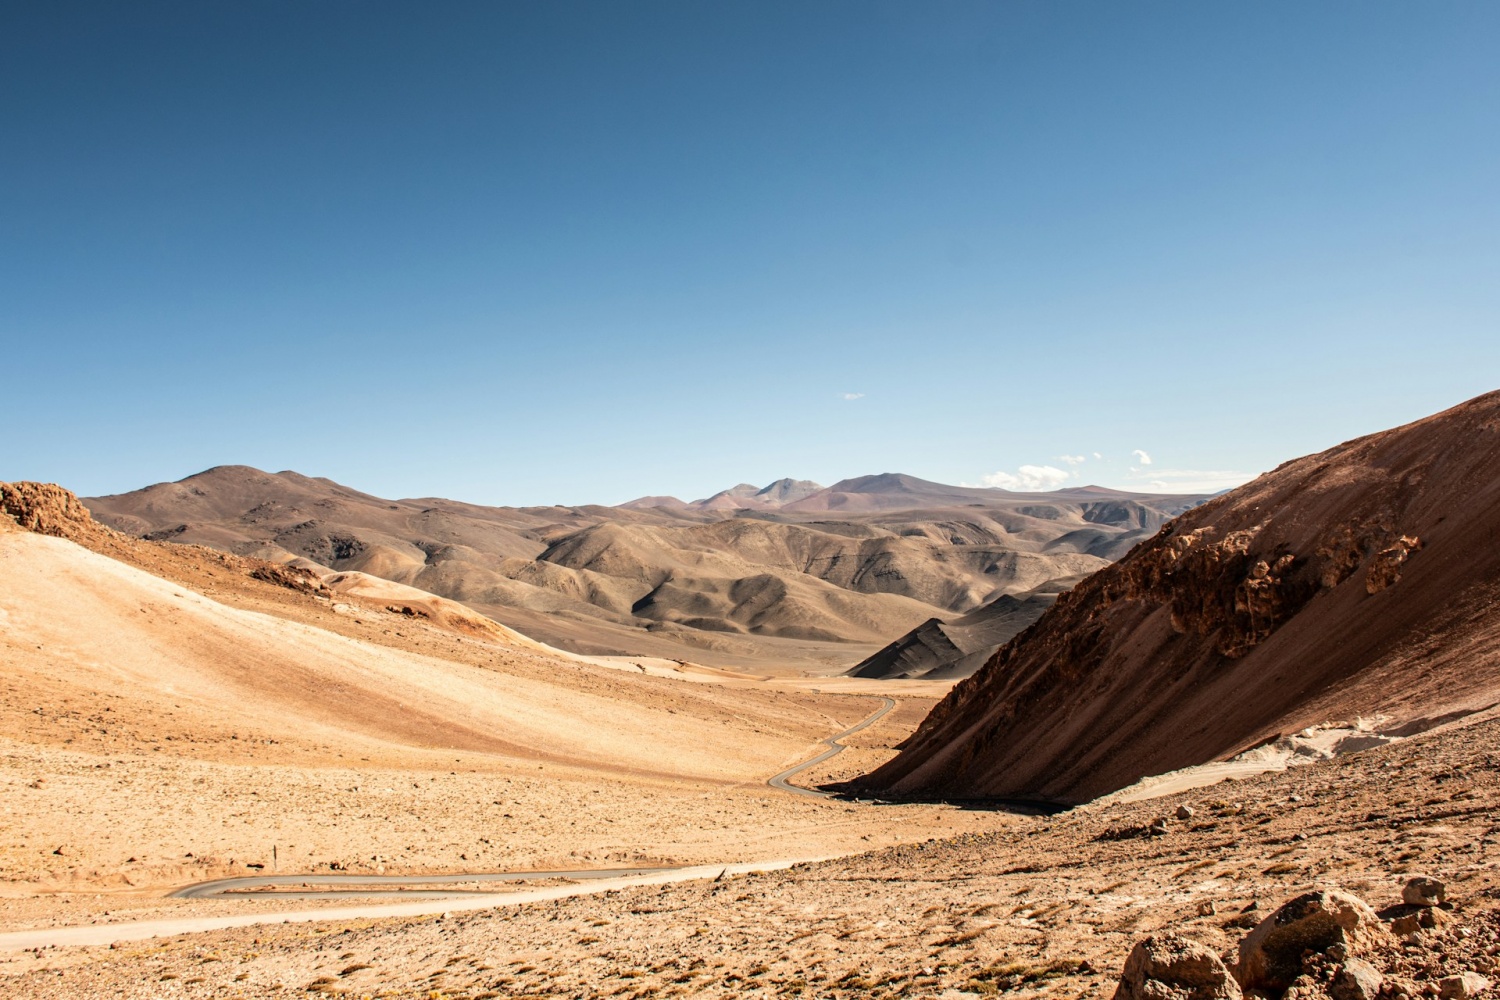 Microbial Biosphere with Previously Unknown Life Discovered 13 Feet Below Atacama Desert in Chile